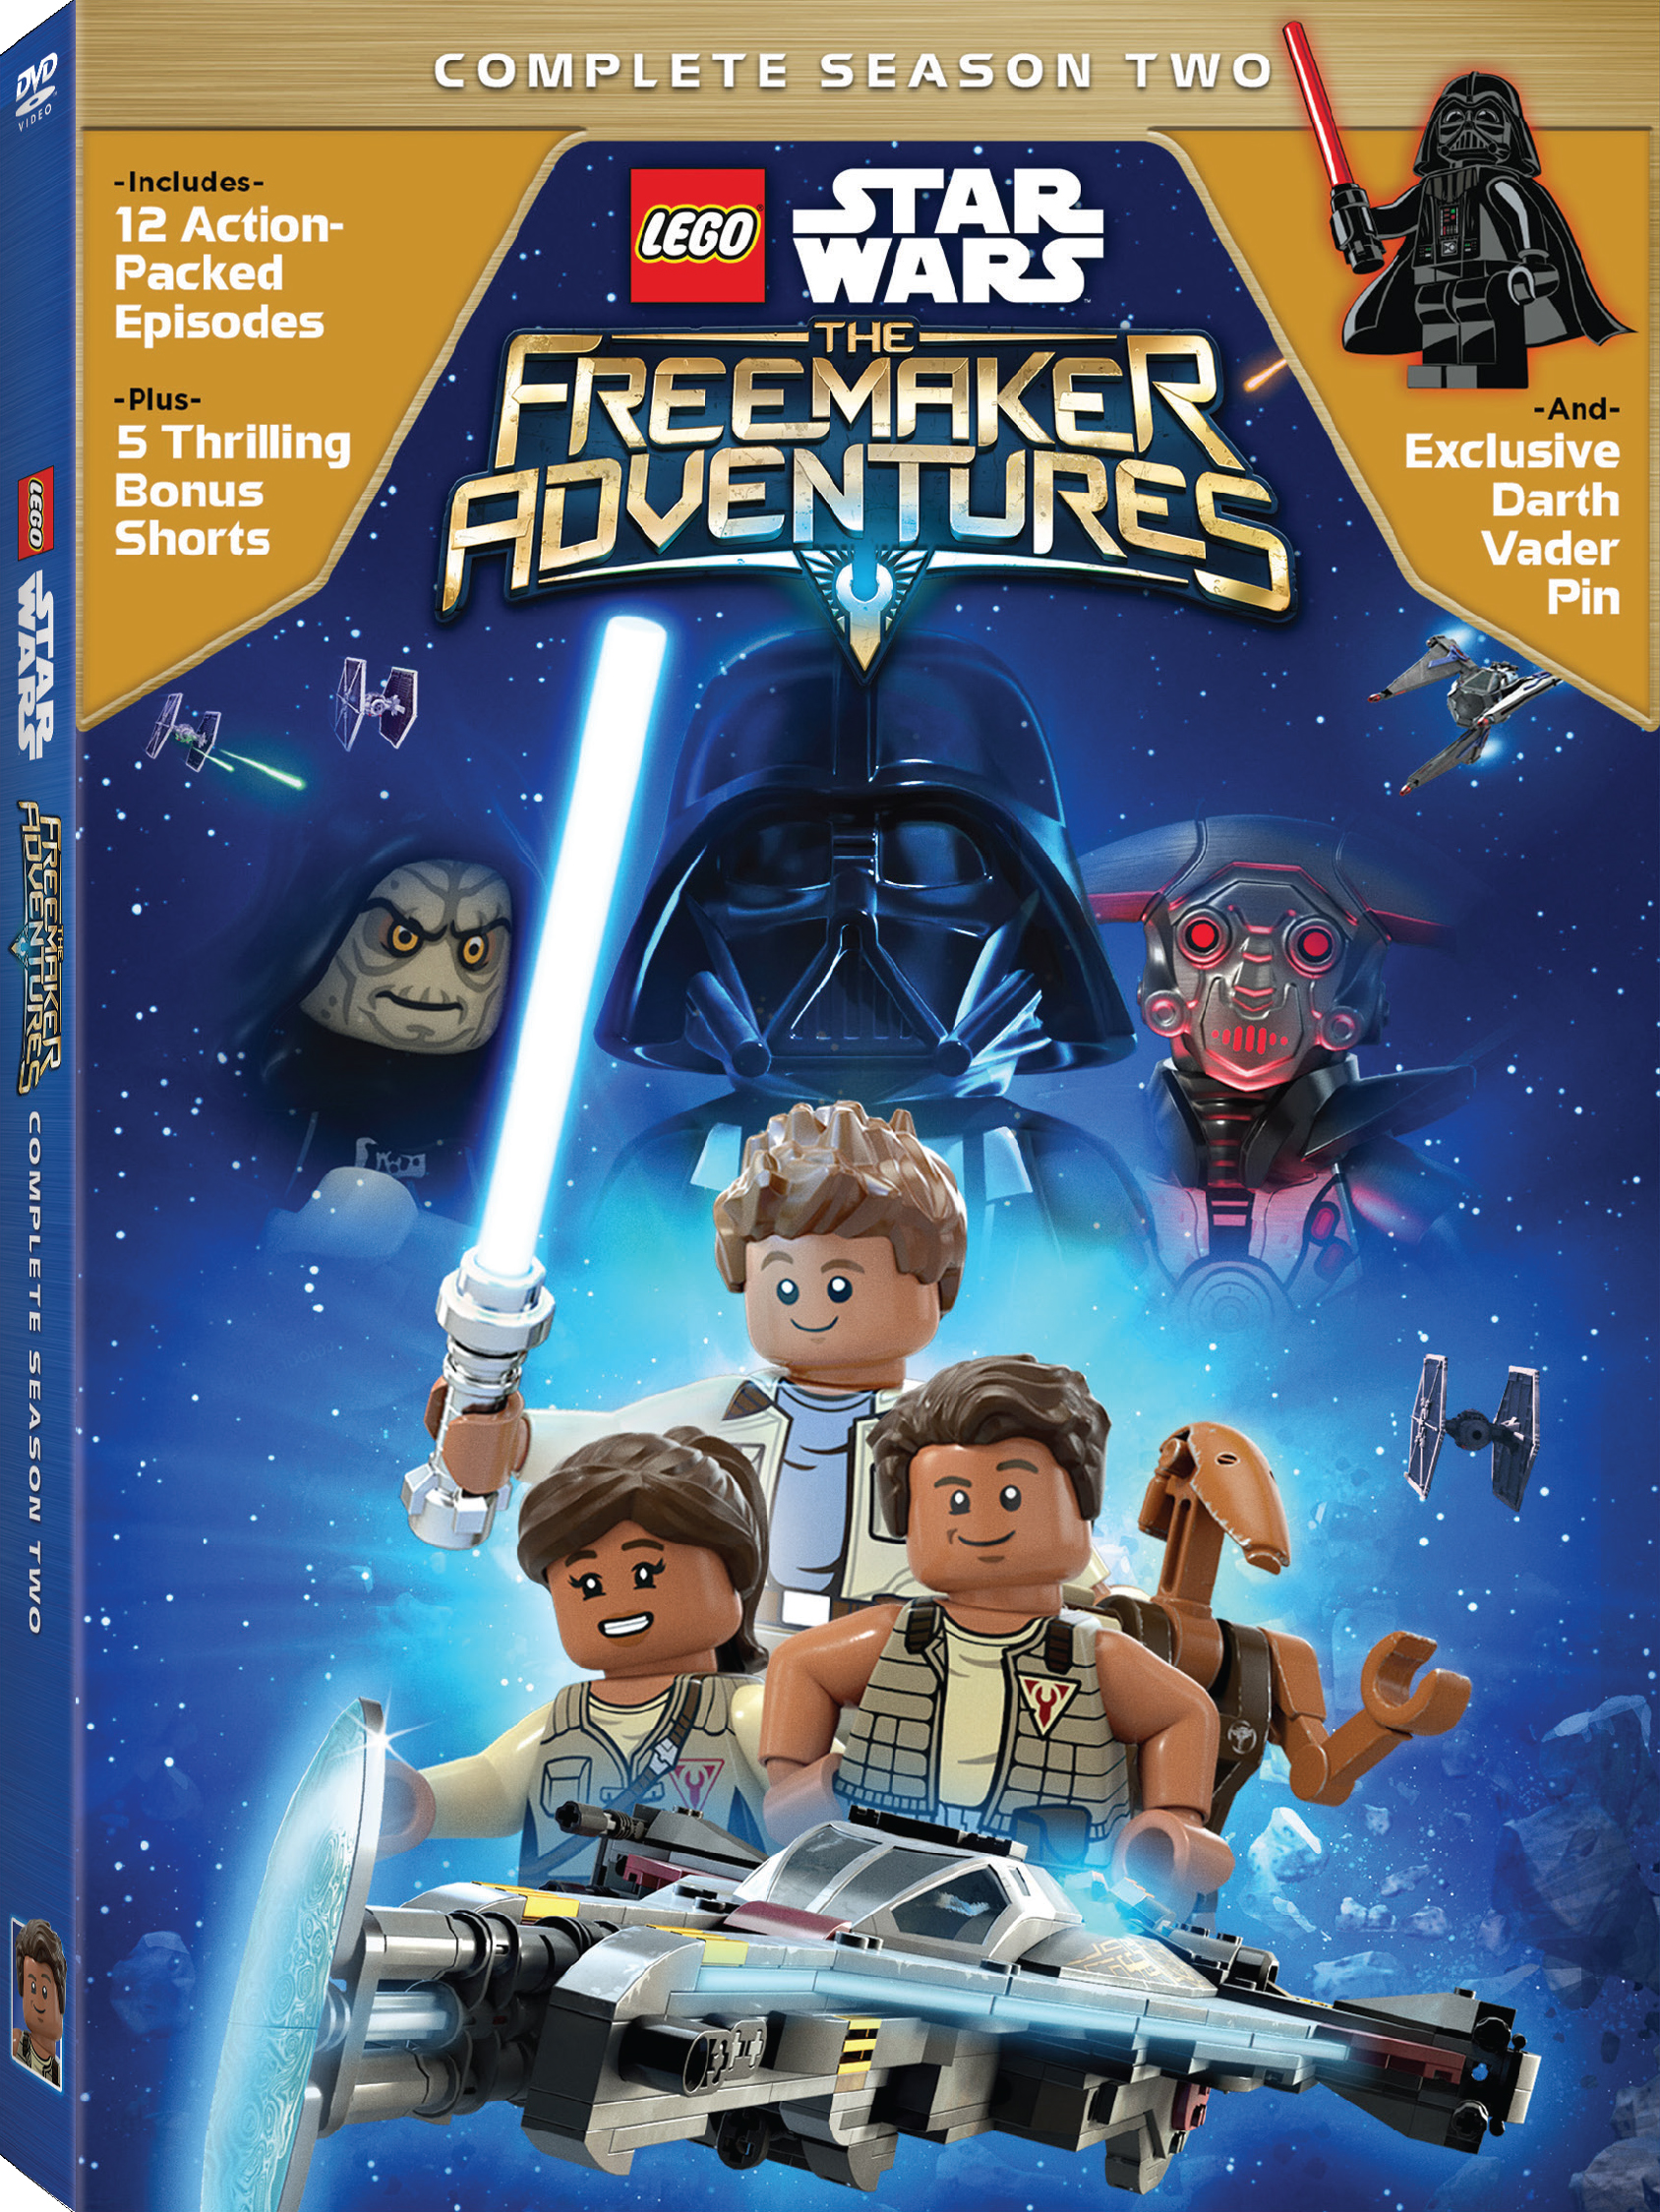 LEGO Star Wars: The Freemaker Adventures Complete Season Two DVD cover (Lucasfilm)